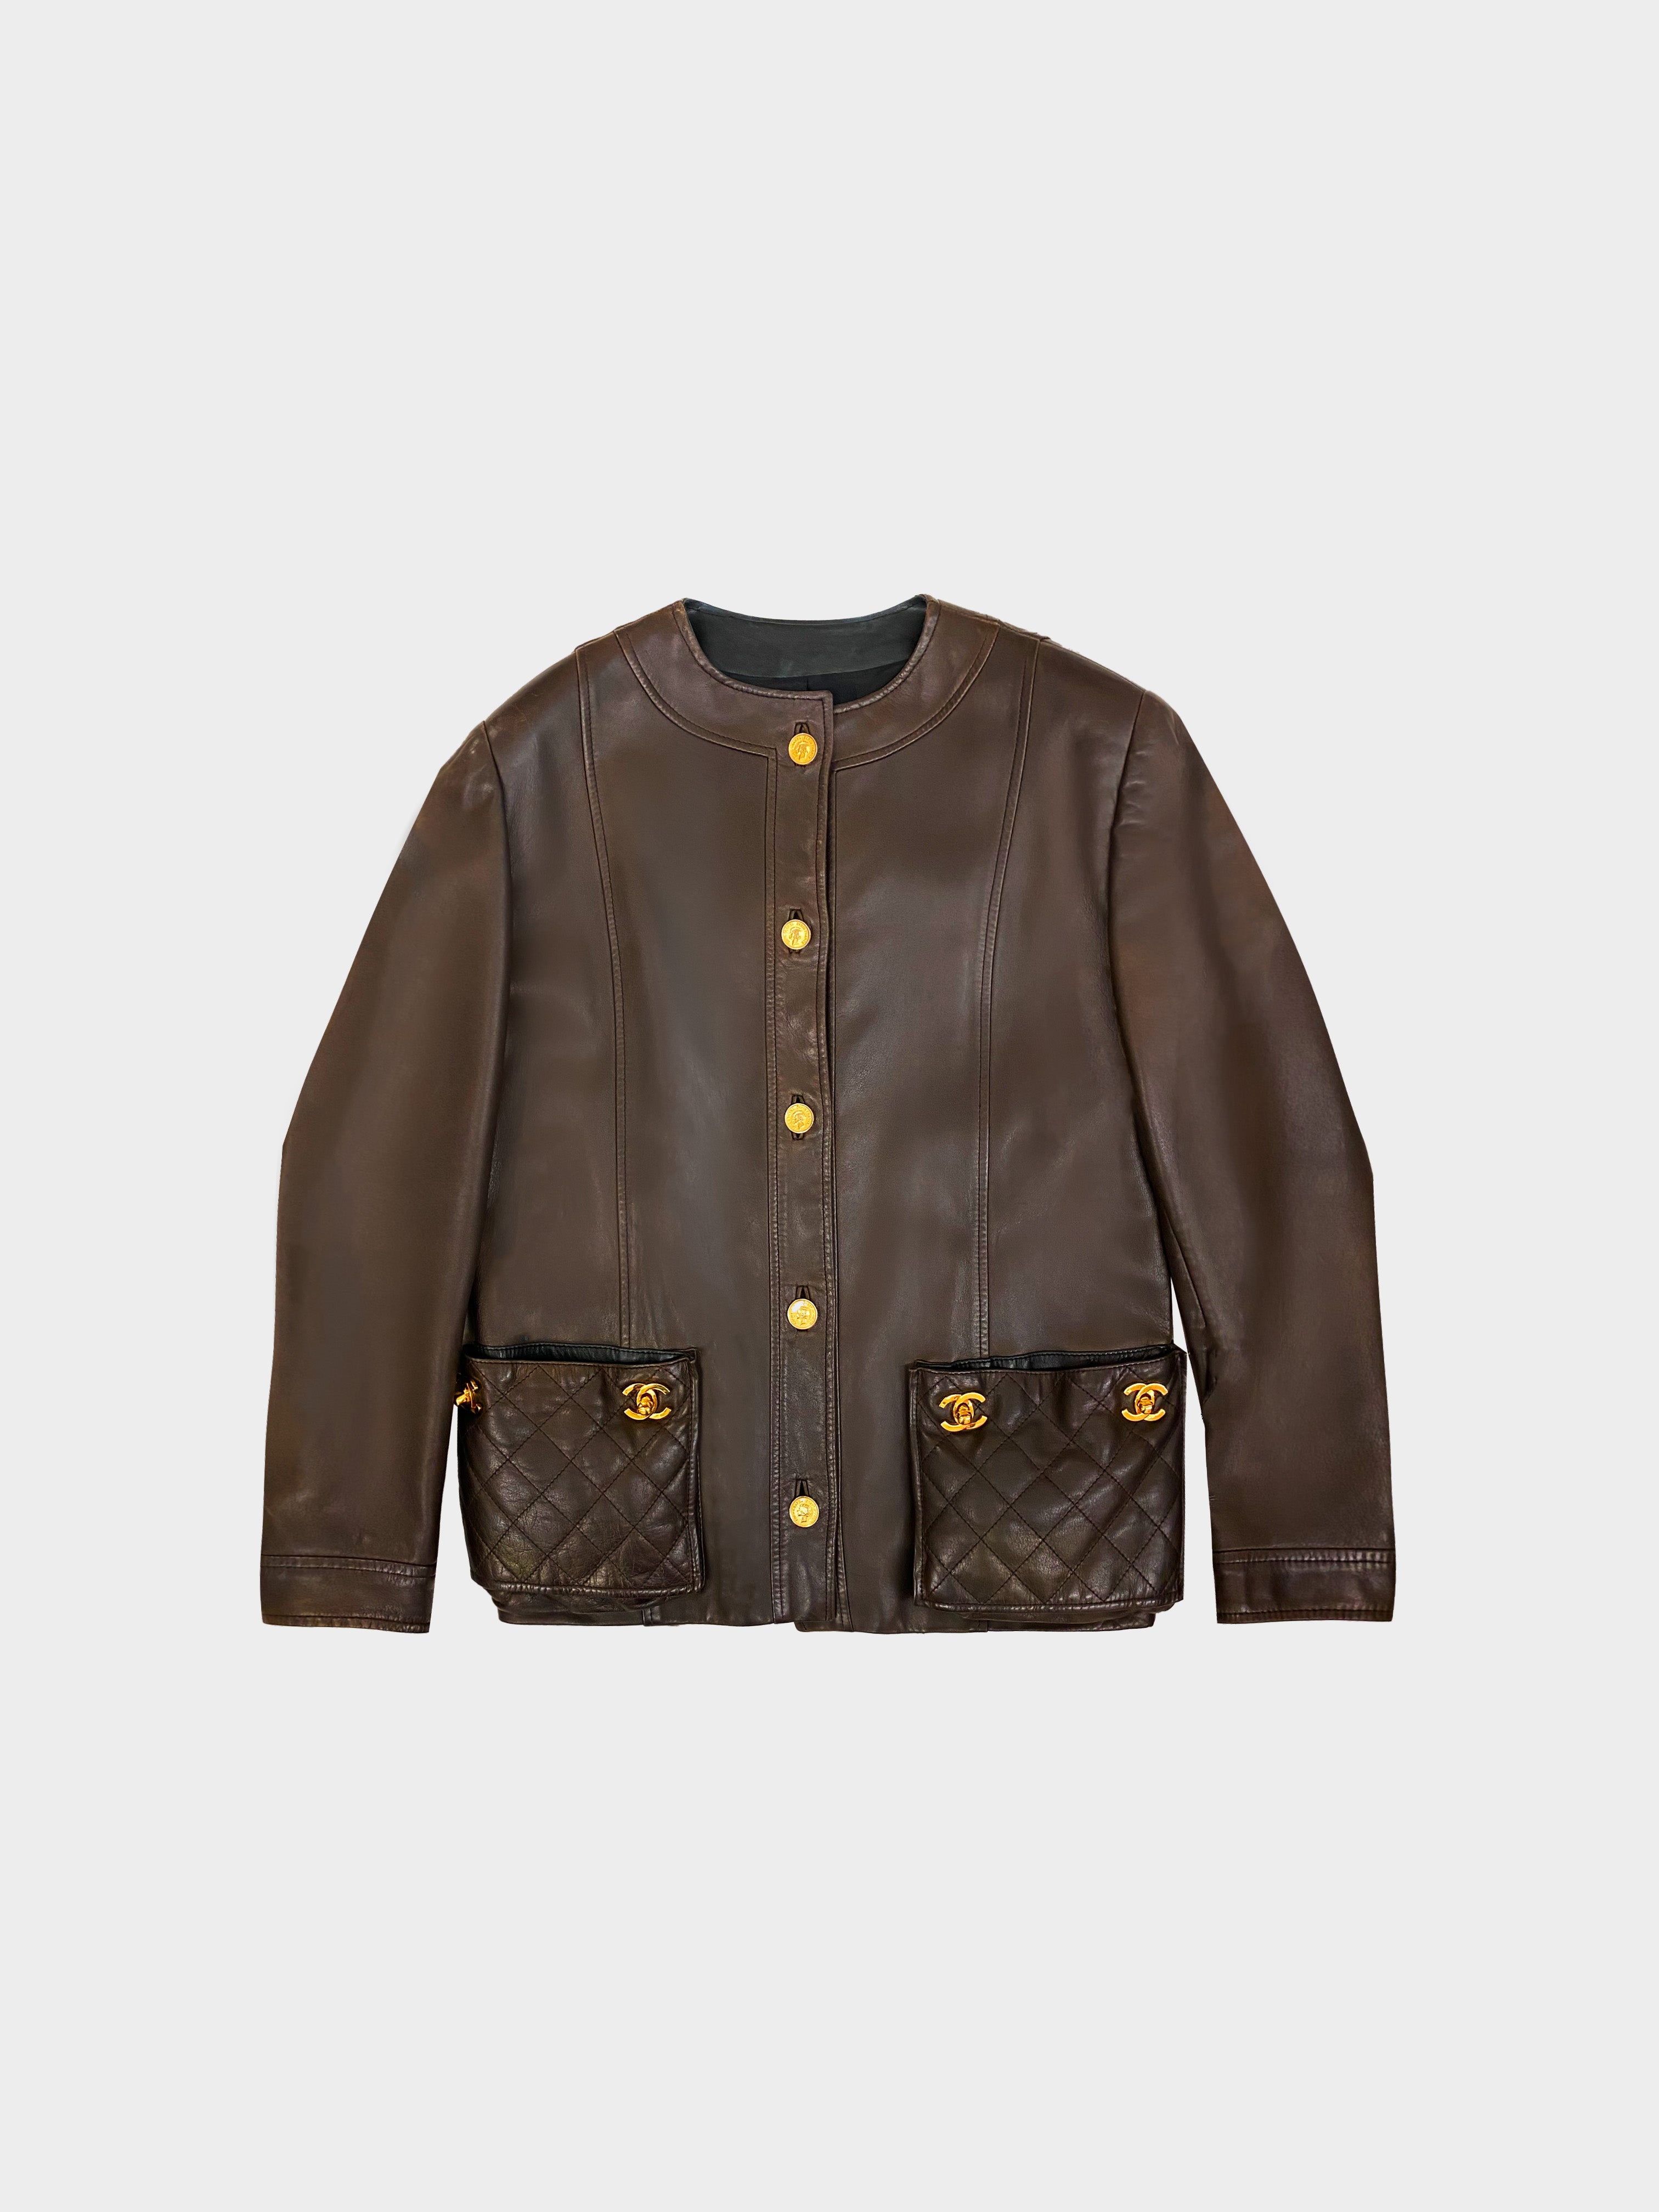 Chanel 1980s Runway Chocolate Leather Jacket with Turn Lock Buttons · INTO